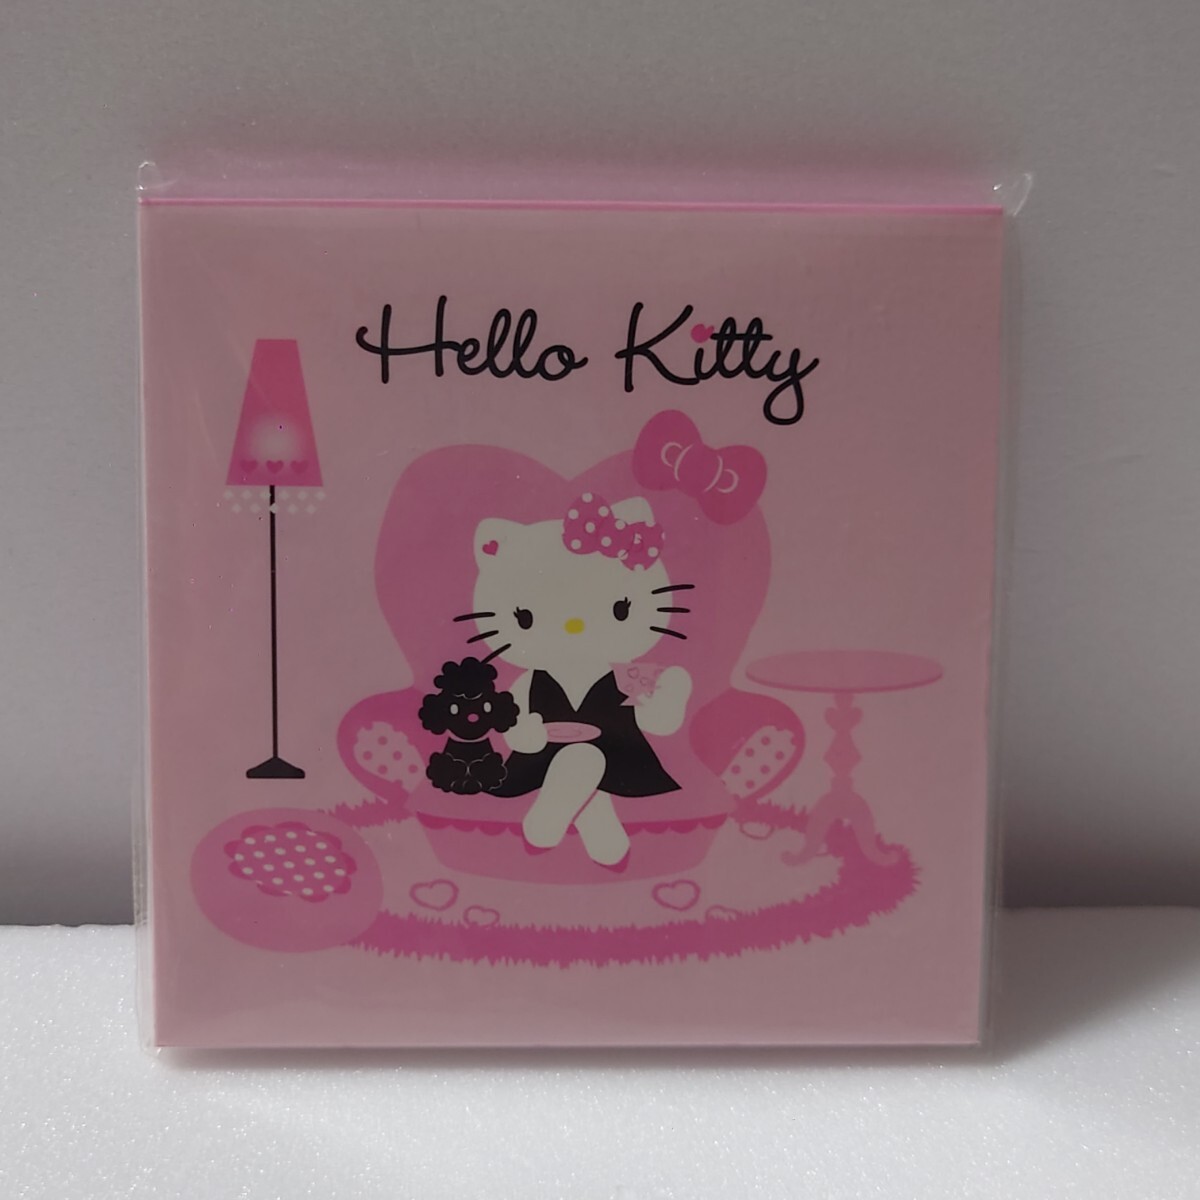  abroad limitation Hello Kitty Hello Kitty Momo Berry Momoberry memory poodle poodle 2005 year 